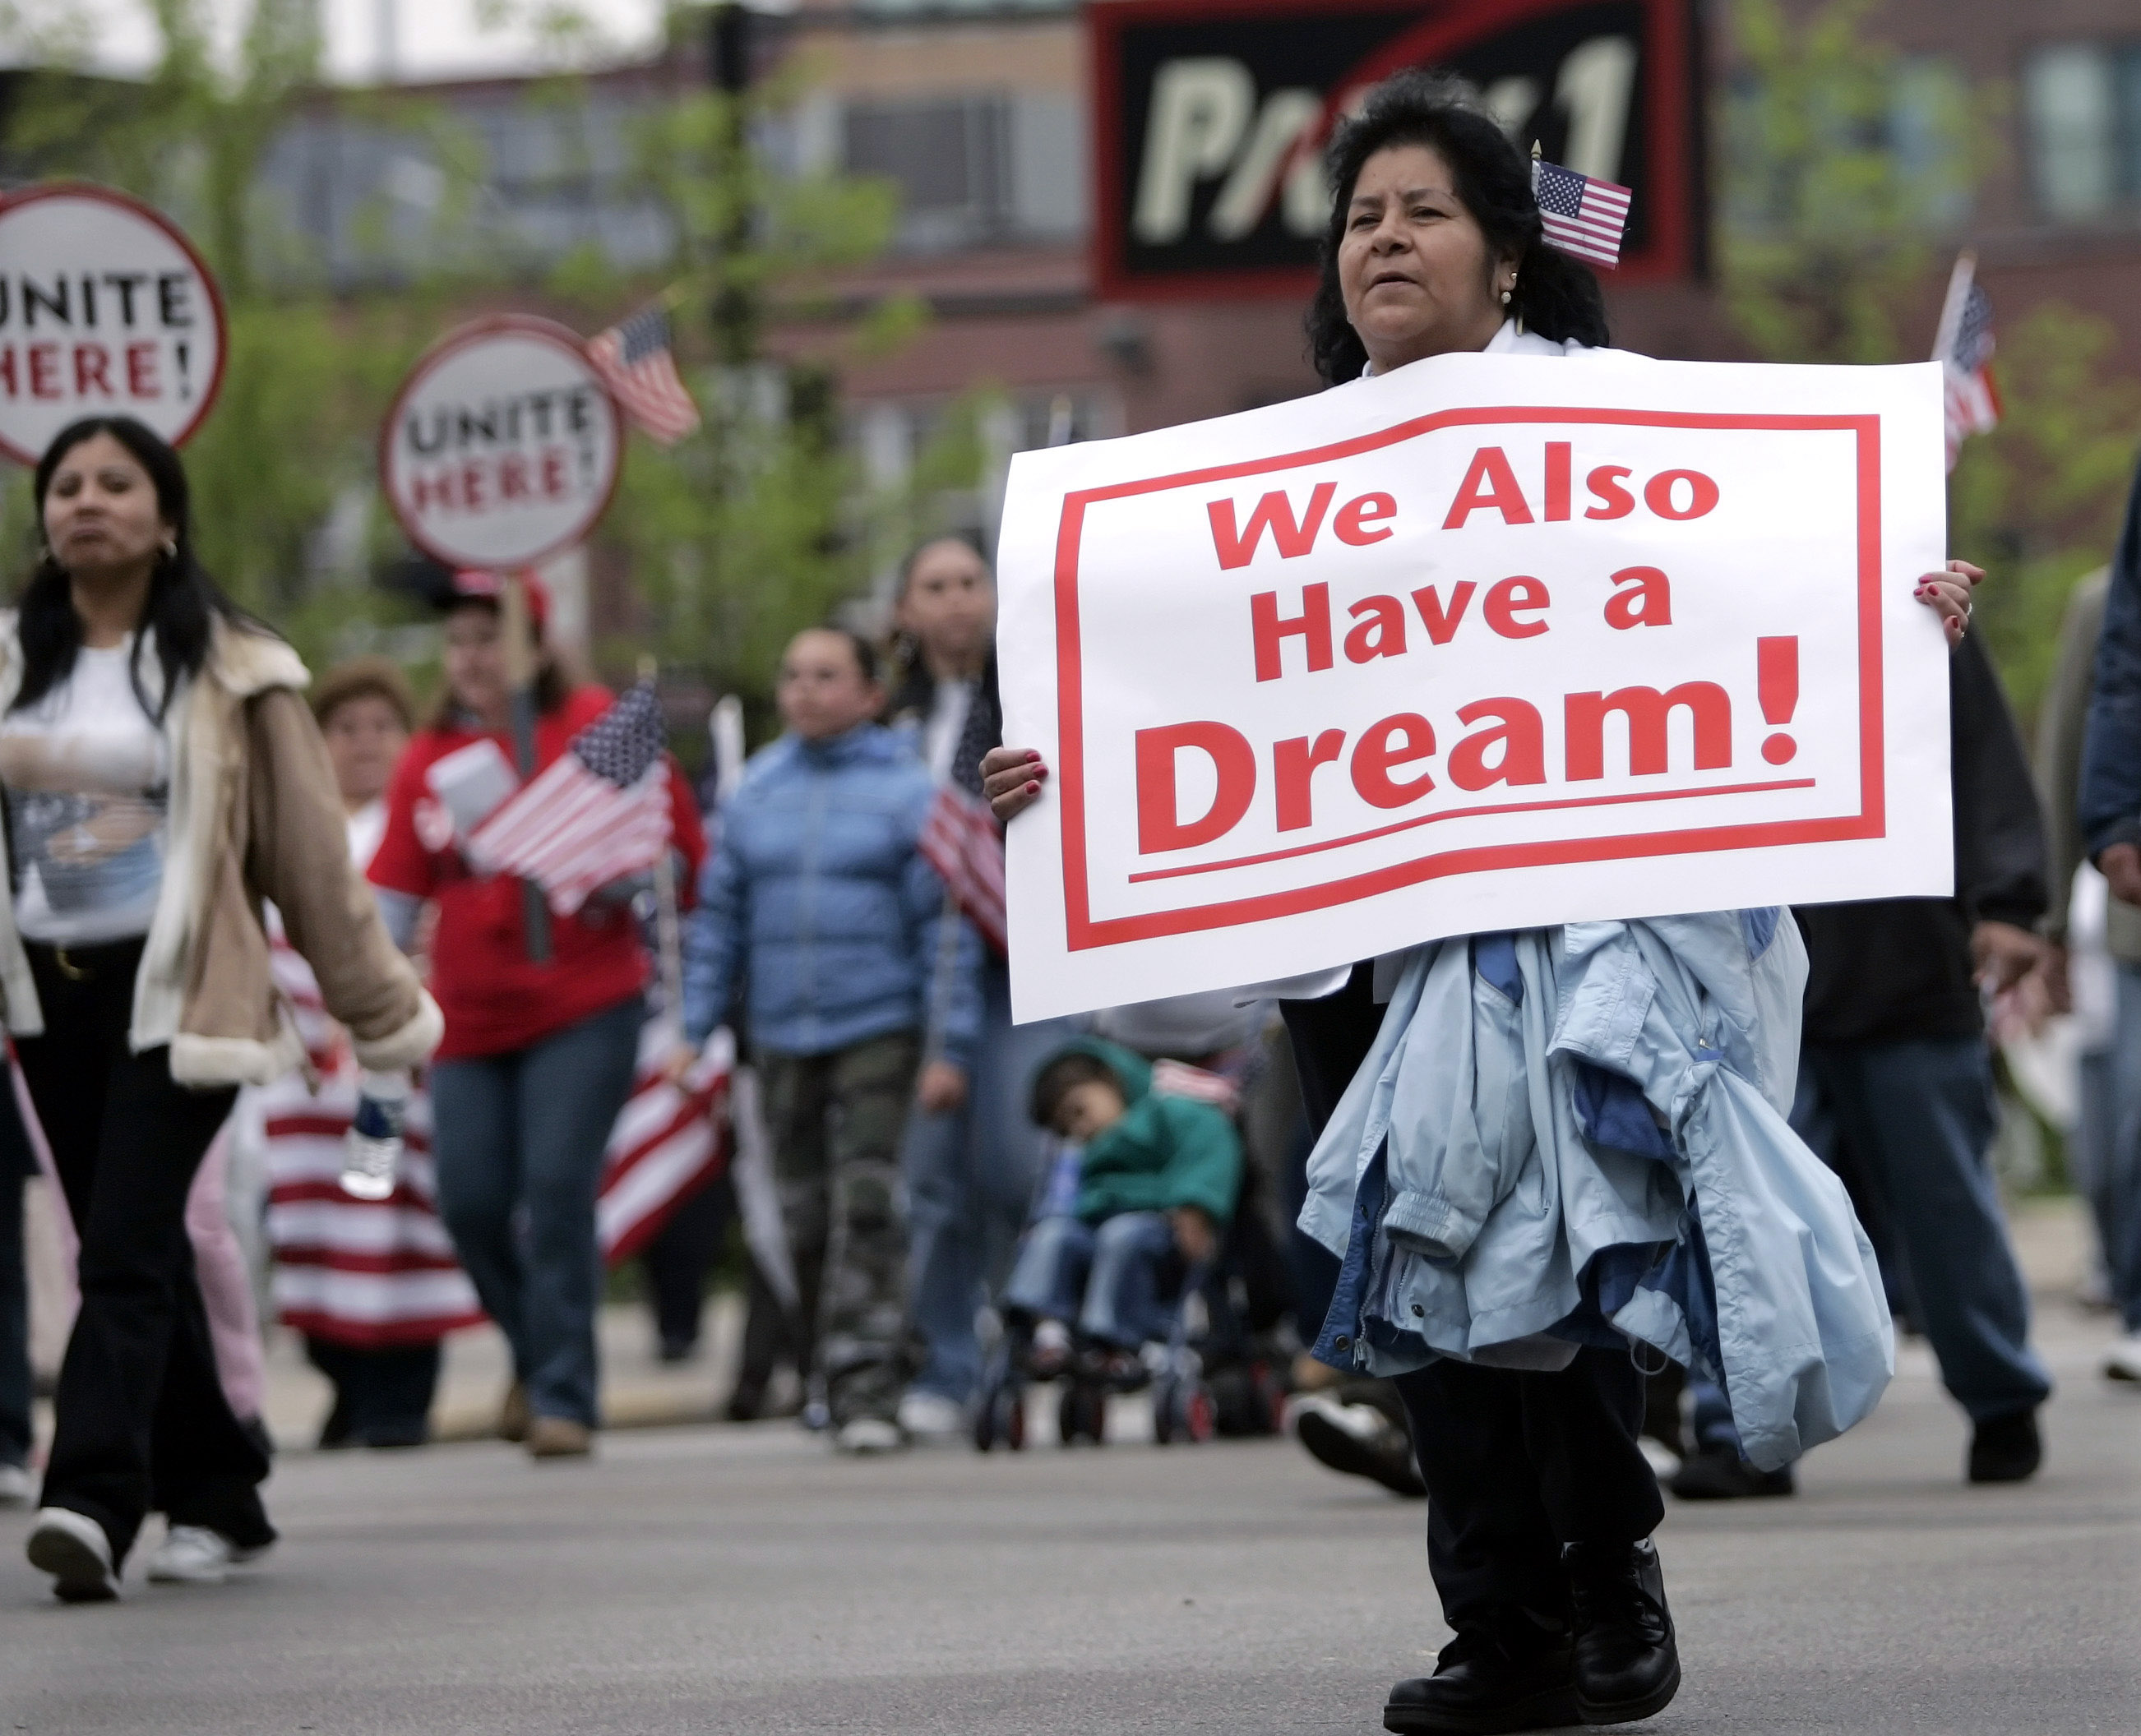 A demonstrator holding a sign saying, "We Also Have a Dream."